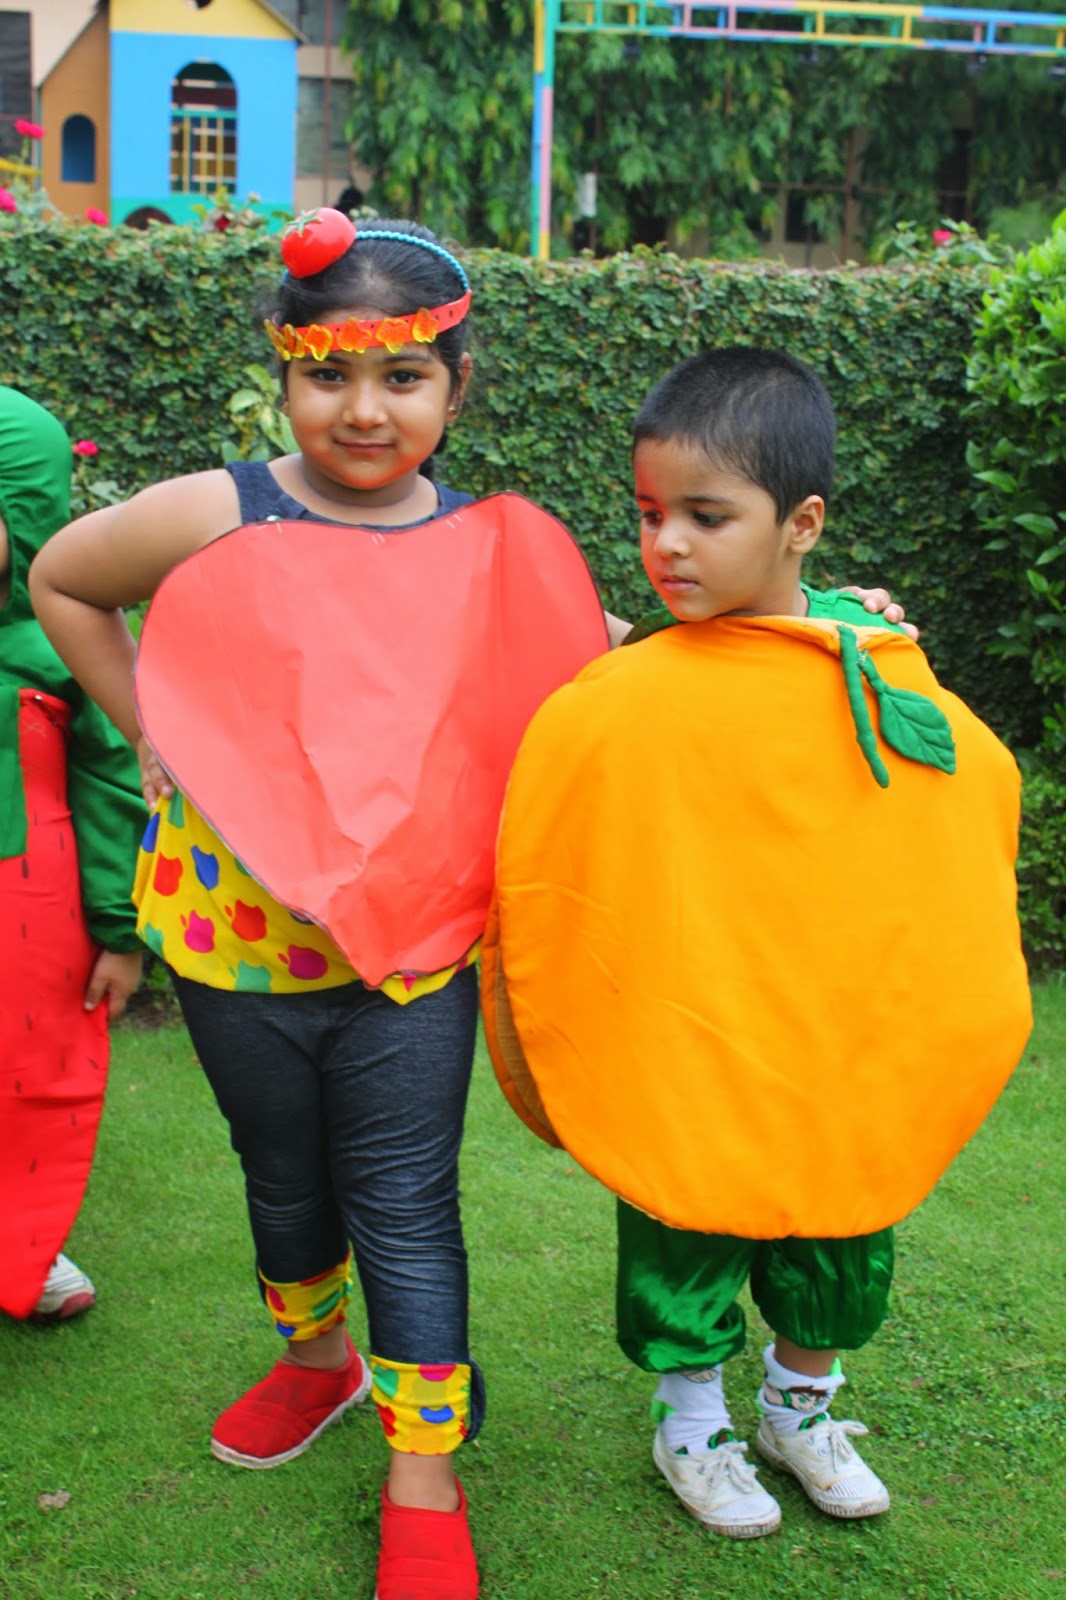 Buy Fancy Steps Realistic Look Coconut Fruit Fancy Dress Costume for School  Competition (3 to 4 Years) Online at Low Prices in India - Amazon.in